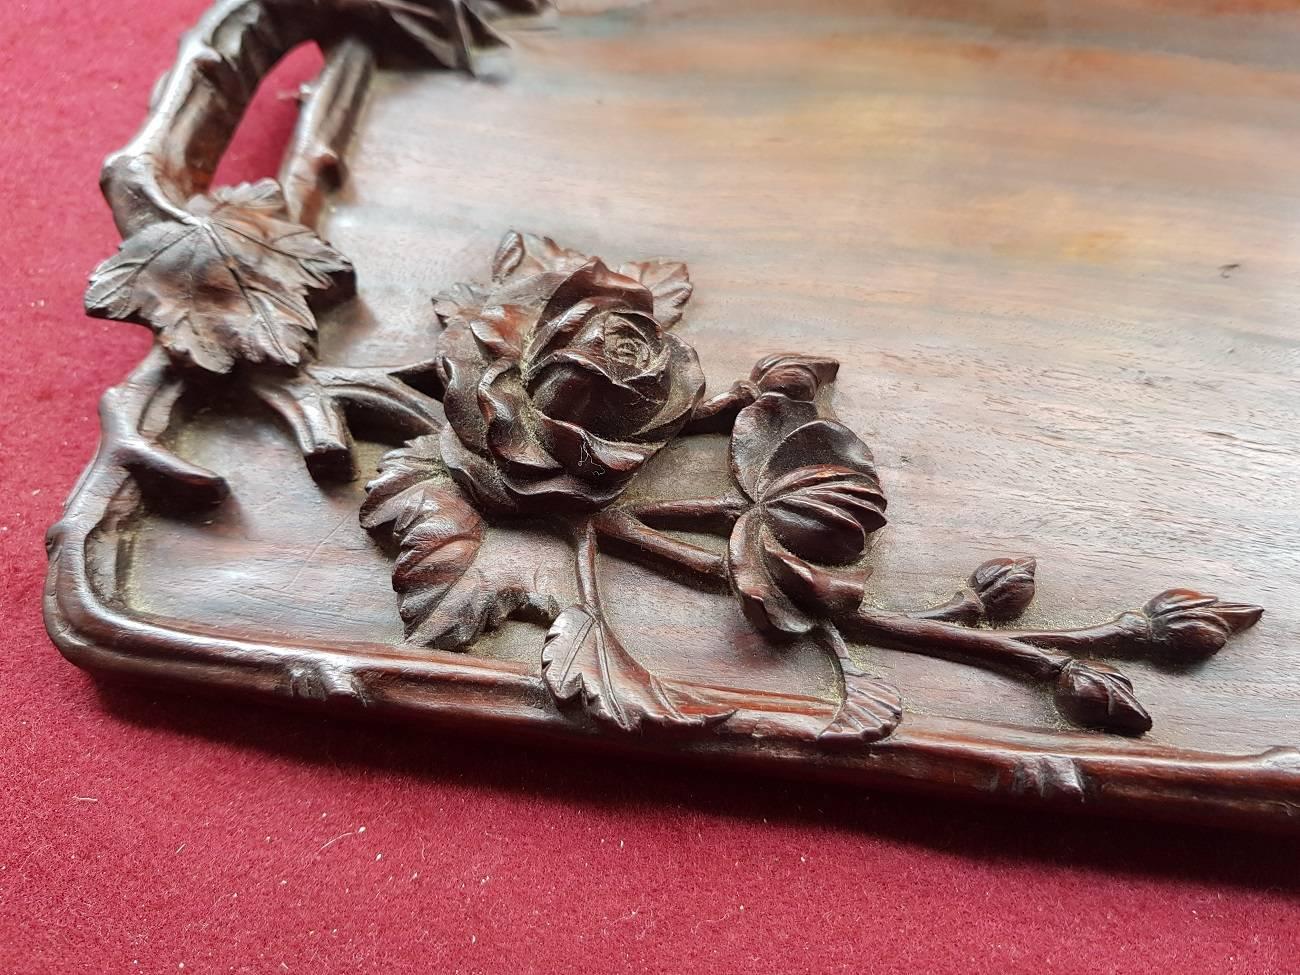 Vintage mahogany serving tray decorated with carving in the form of leaves, flowers and branches, mid-20th century.

The measurements are,
Depth 20 cm/ 7.8 inch.
Width 34 cm/ 13.3 inch.
Height 2.5 cm/ 0.9 inch.
 